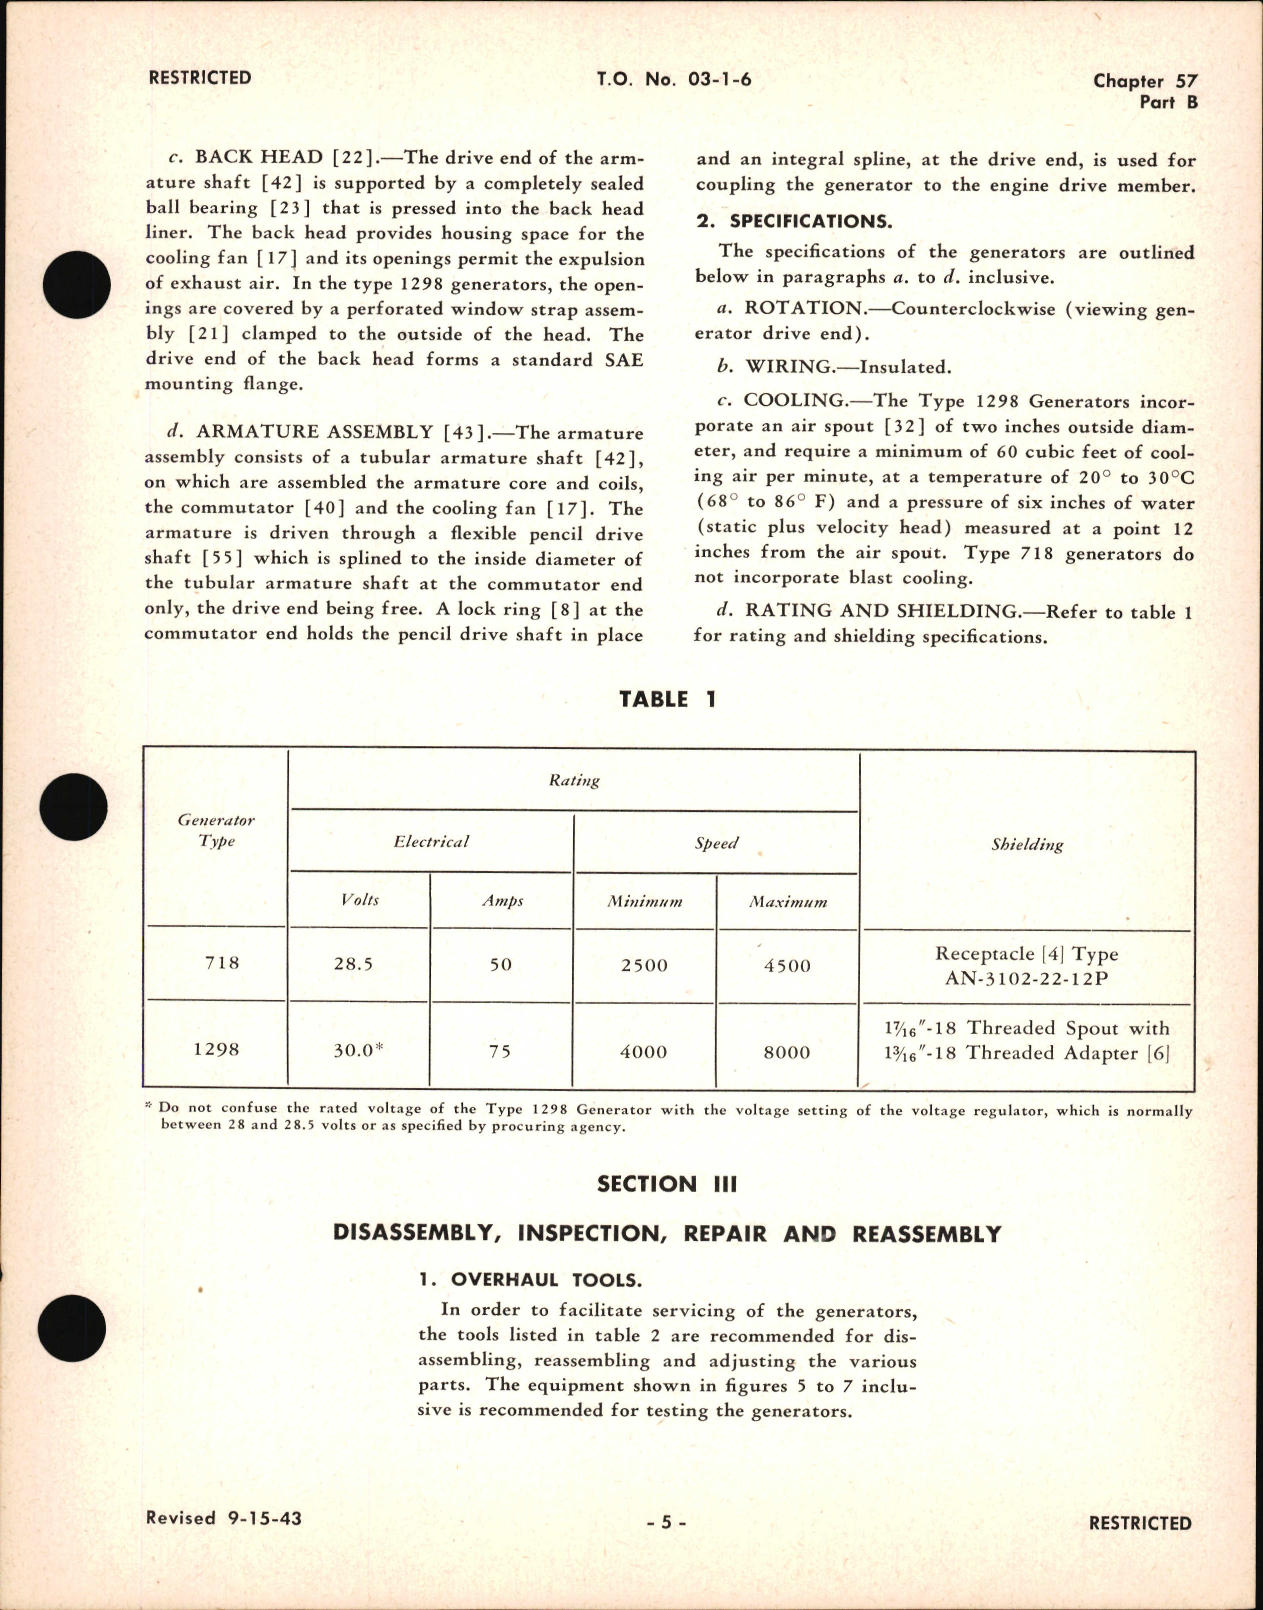 Sample page 5 from AirCorps Library document: Overhaul Instructions for Types 718 & 1298 D-C Generators, Ch 57 Part B